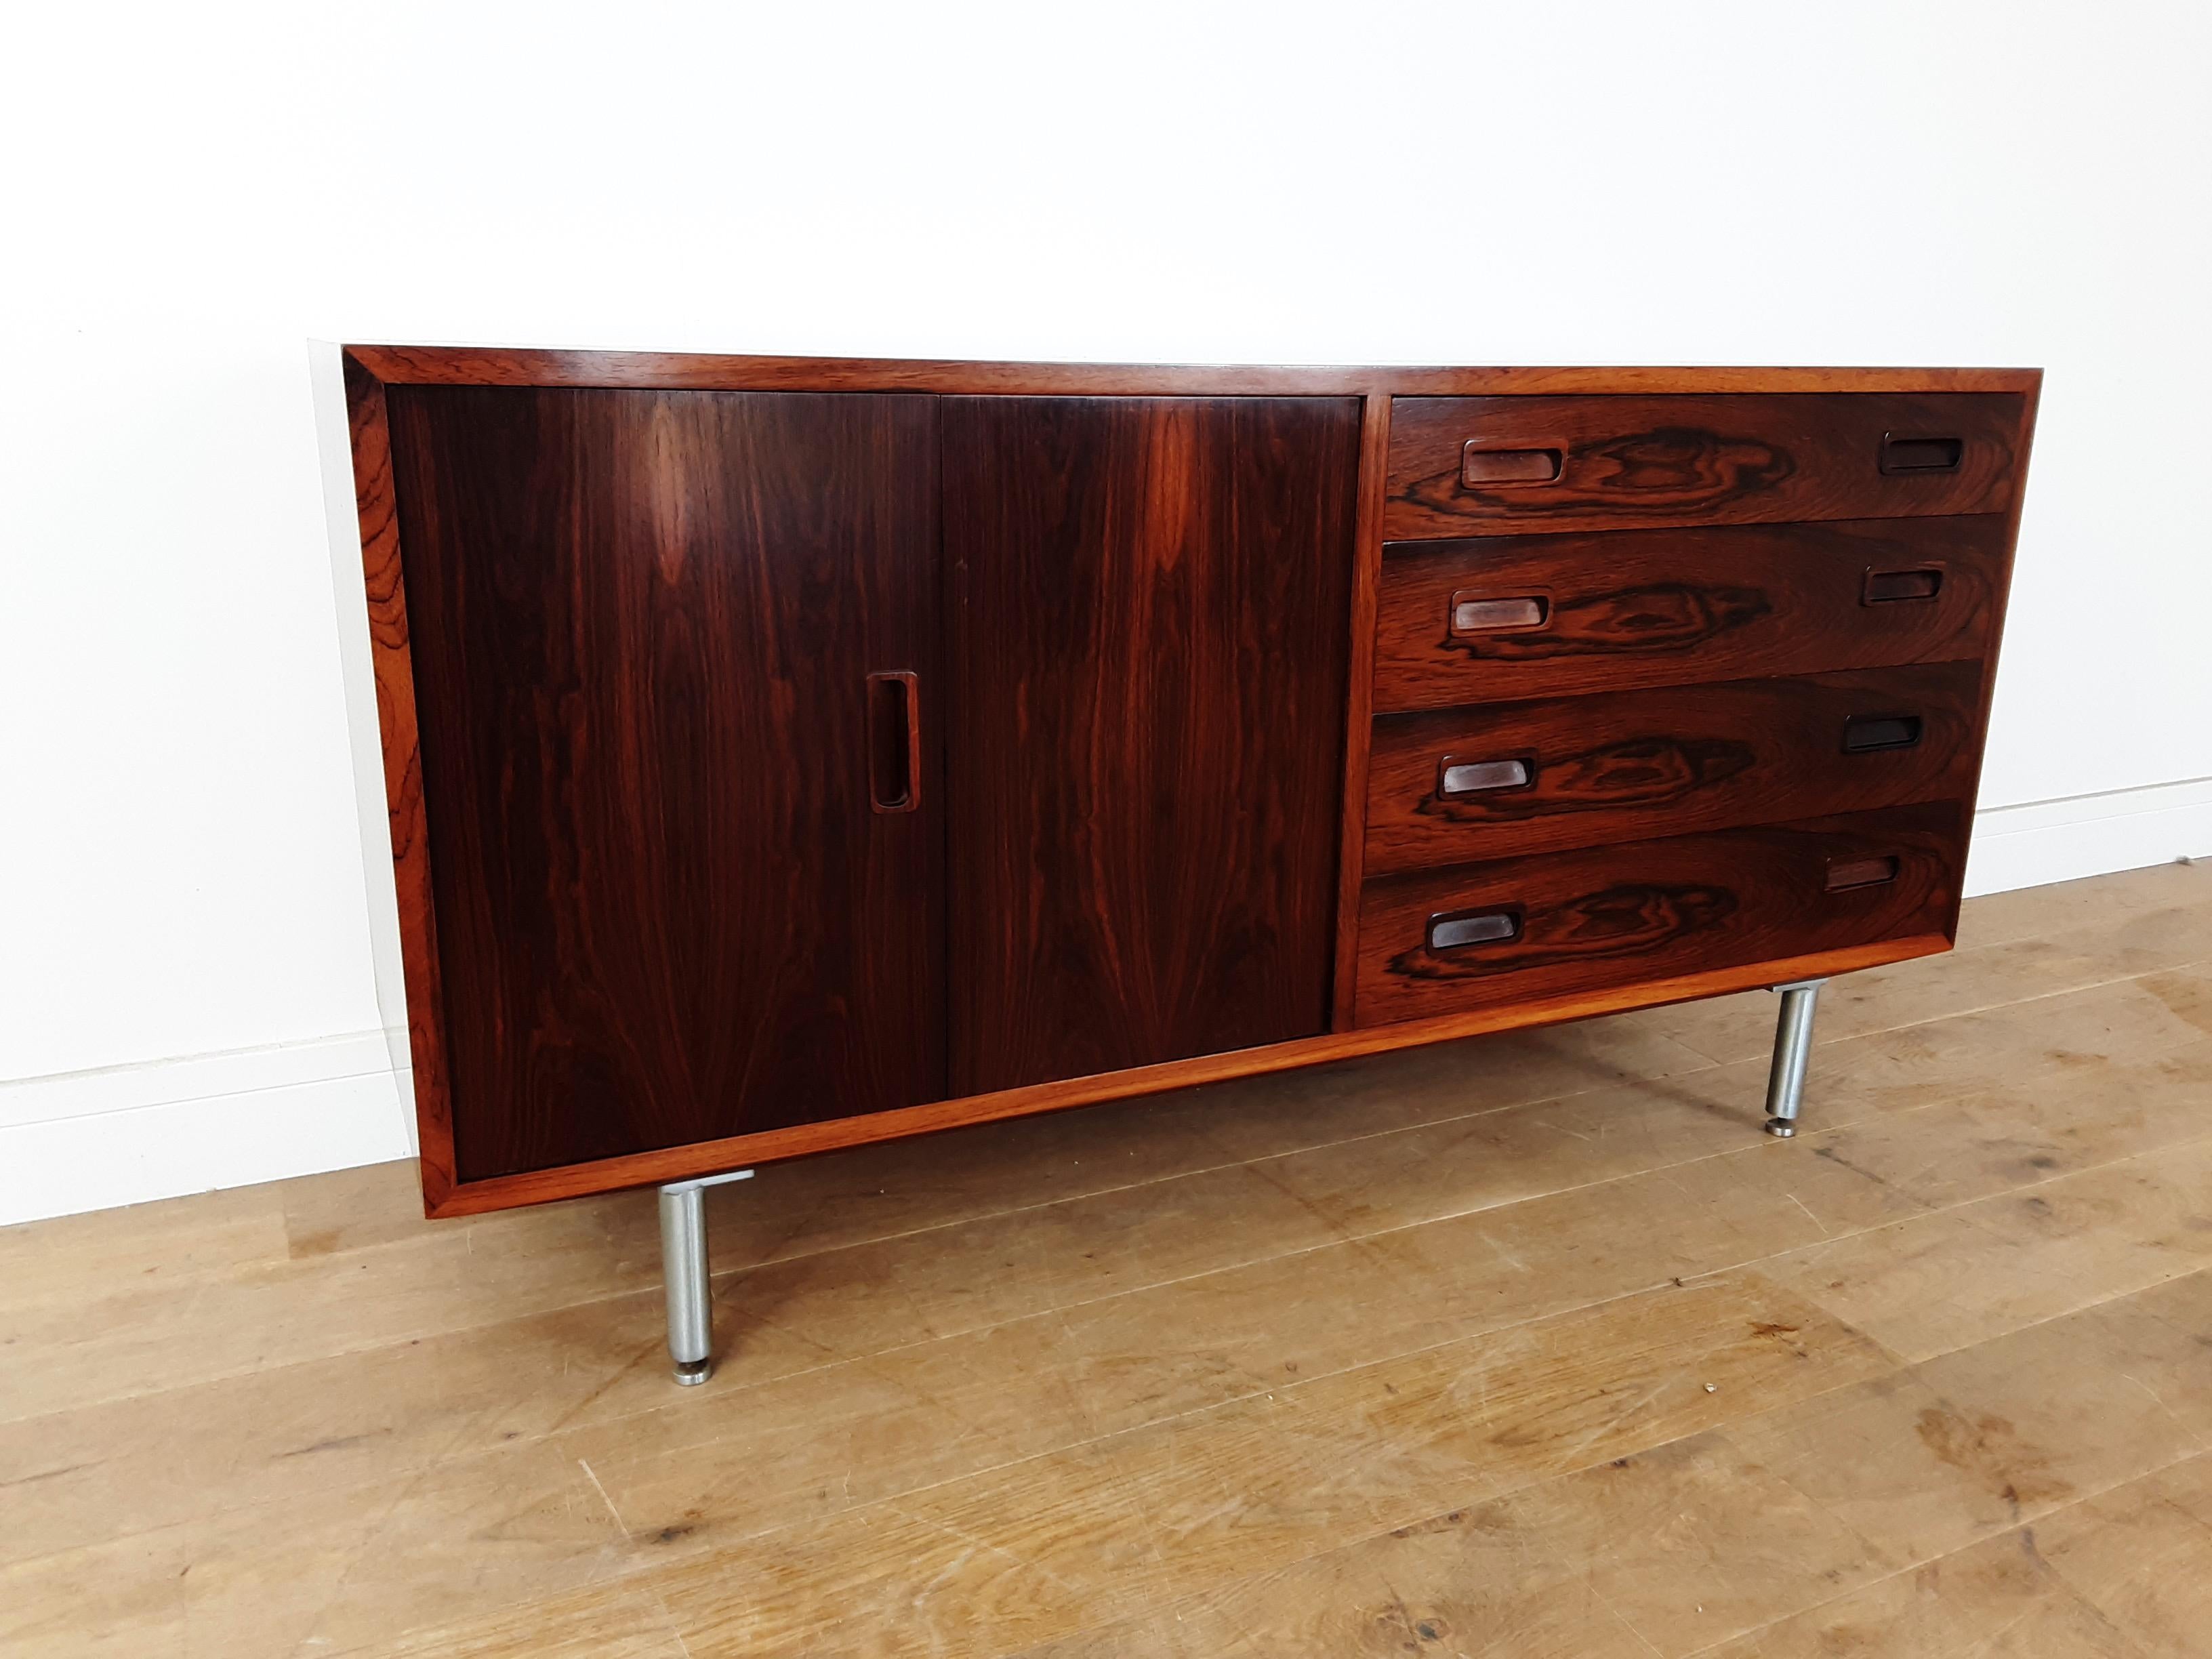 Danish midcentury sideboard.
Beautiful Brazilian rosewood sideboard raised on polished aluminium legs with adjustable height for uneven floors.
sliding cupboard door to the left and a bank of four drawers to the right.
beautiful cabinet with the